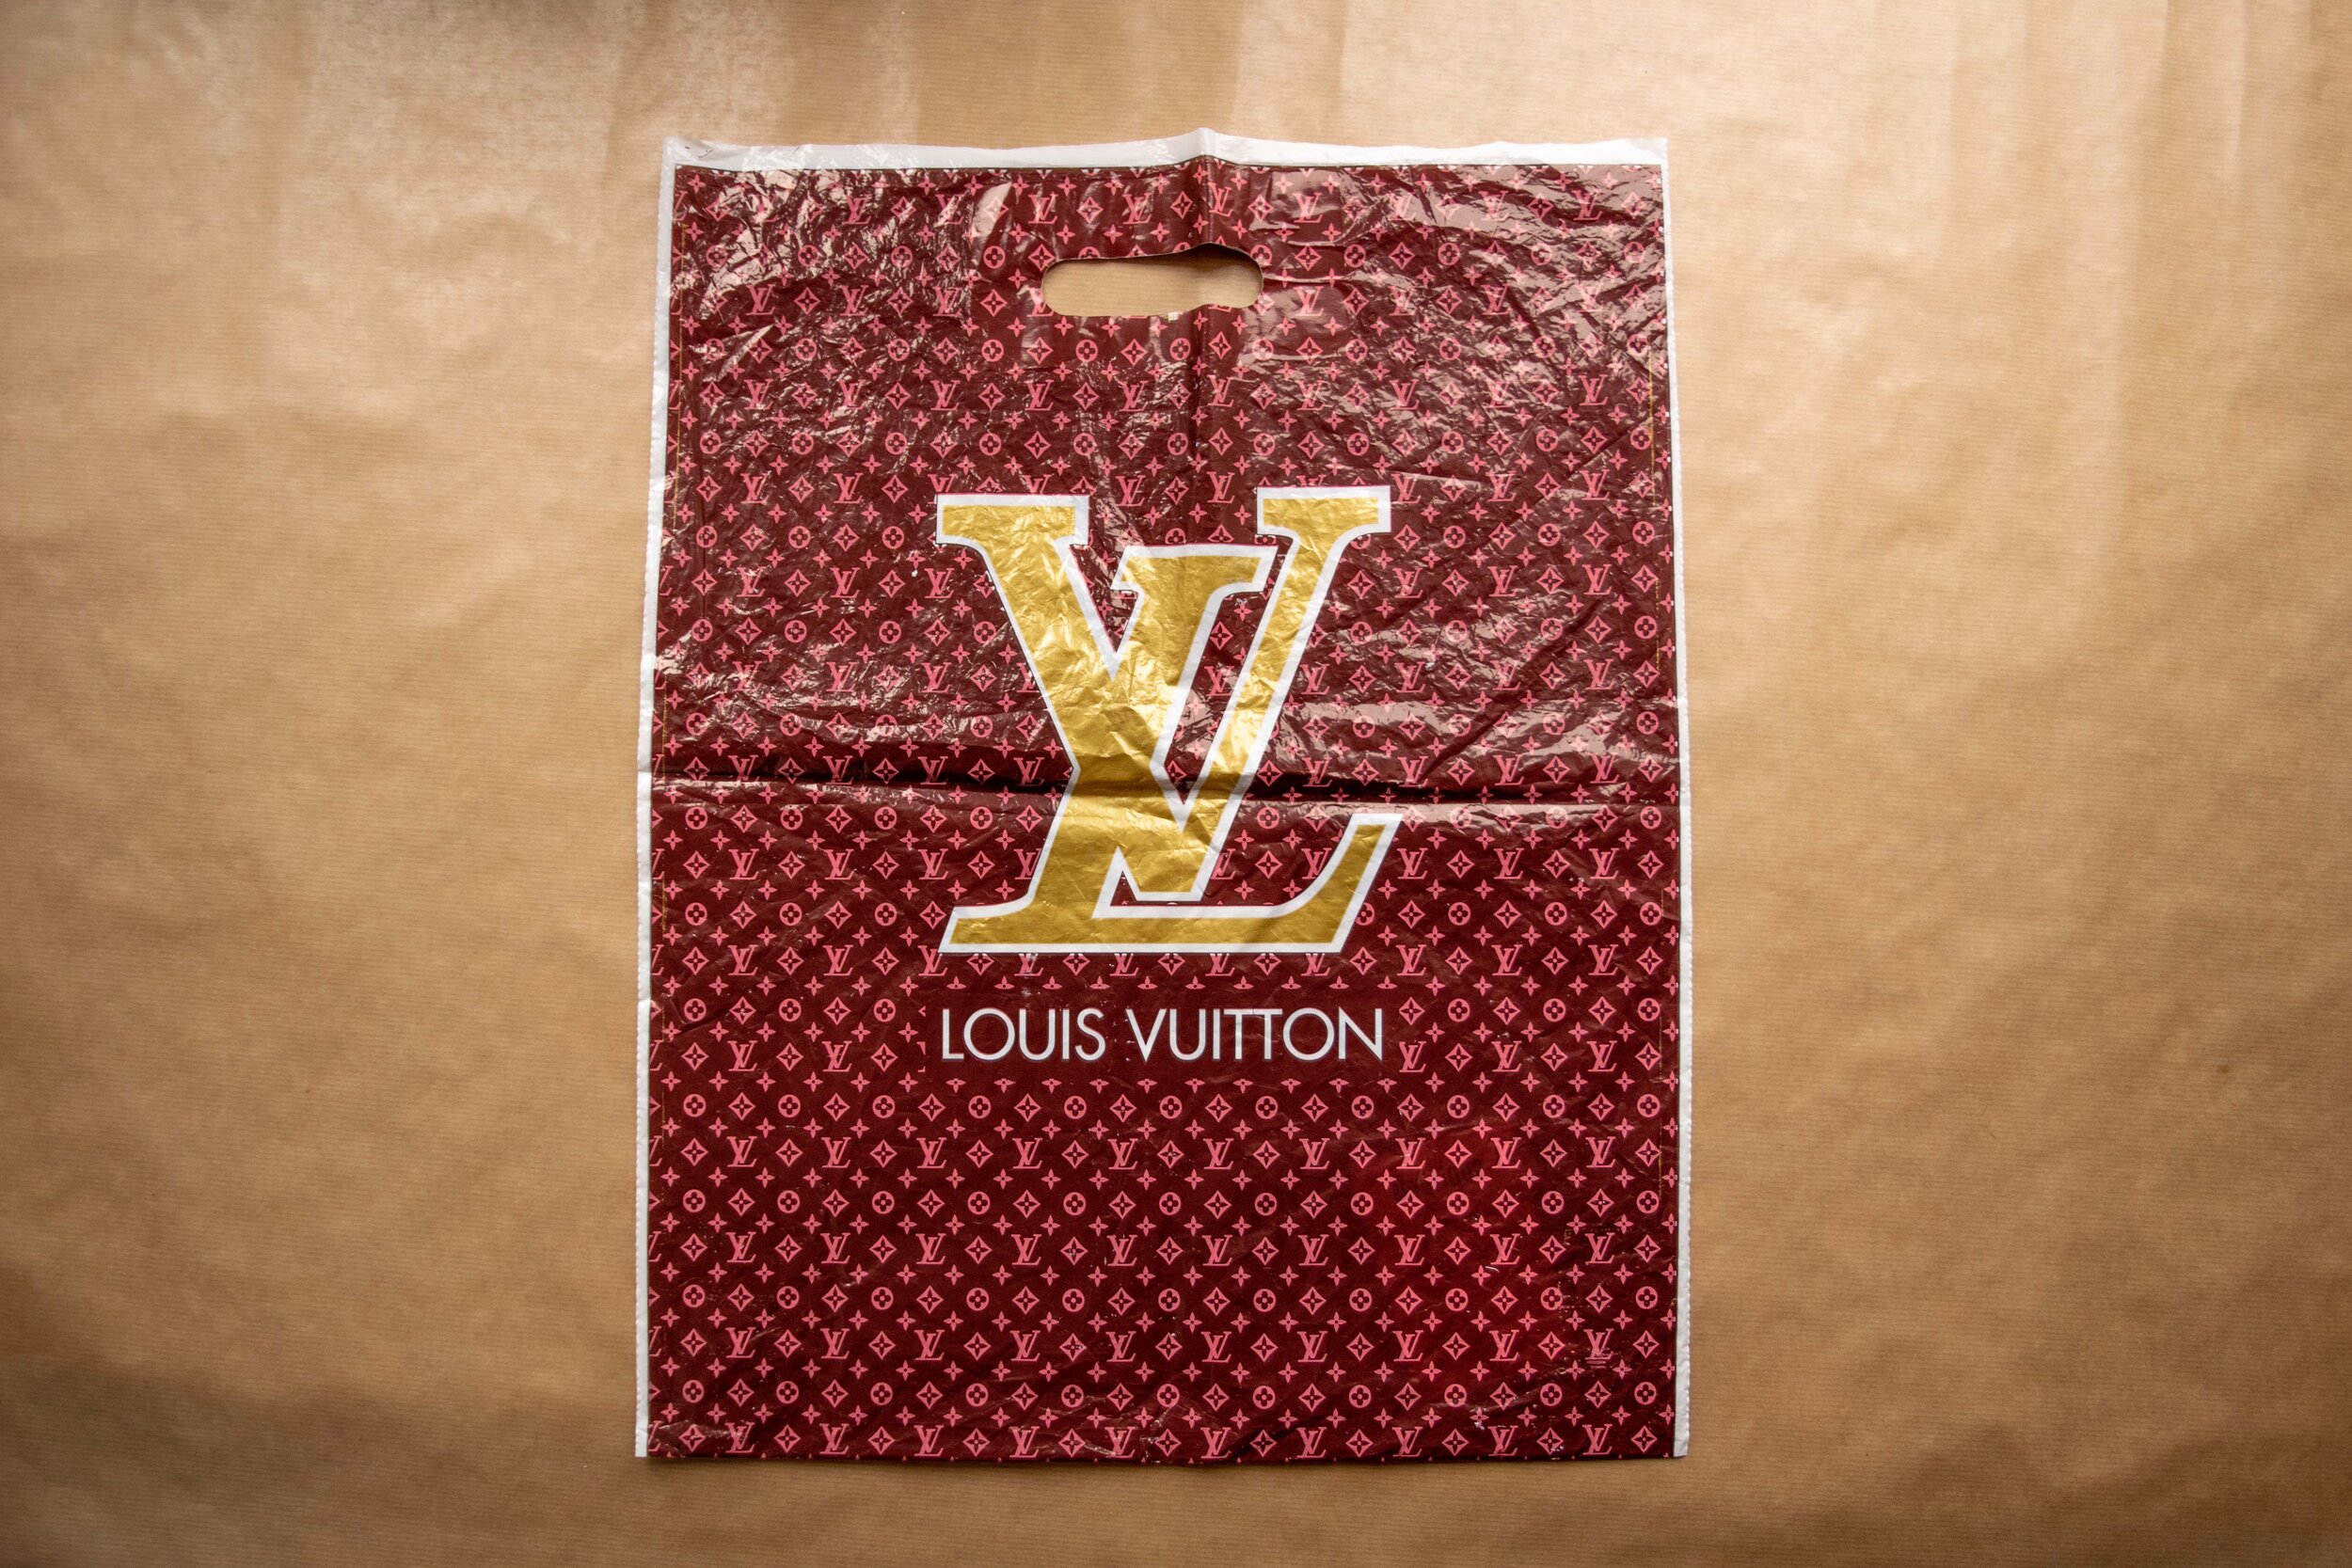 Louis Vuitton: The Story behind the Bag — THE PLASTIC BAG MUSEUM